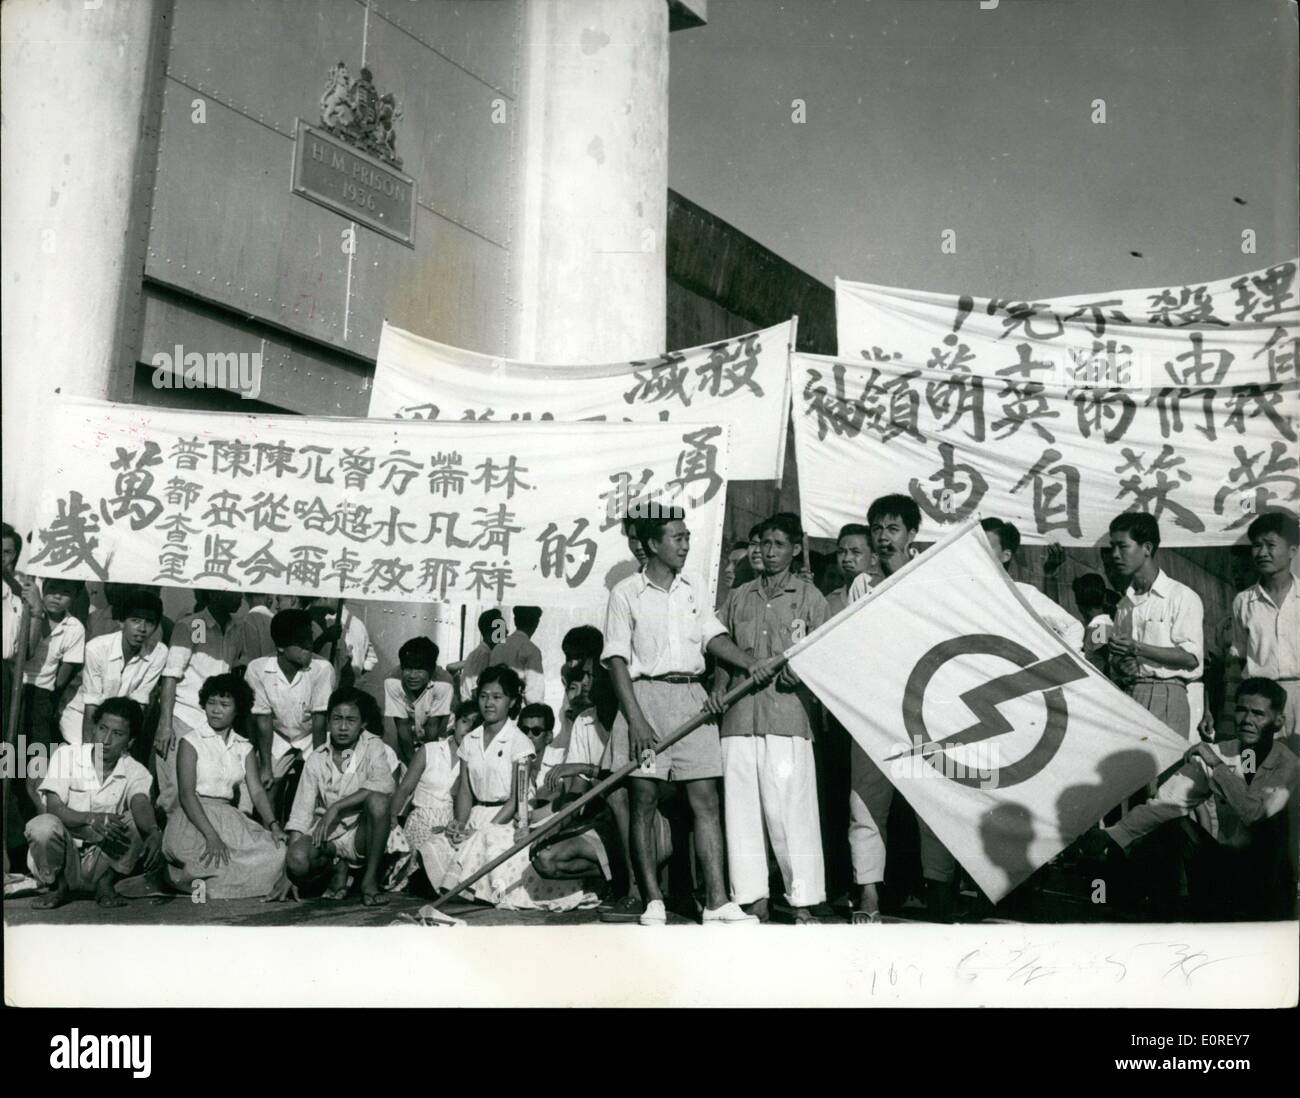 Jun. 06, 1959 - People's action party Members Released from Jail : The eight members of the people's Action party - which recently won the Singapore elections - and who have been held in Changi Jail since the 1956 riots - have been released. This follows an ultimatum from the leader of Party - Mr. Lee Kuan yew the Prime minister designate - that he would not from a Government until the men were released. Singapore has been declared an independent state withing the Commonwealth. Photo shows Youthful supporters with their banners outside the prison gates - prior to release of the detainees. Stock Photo